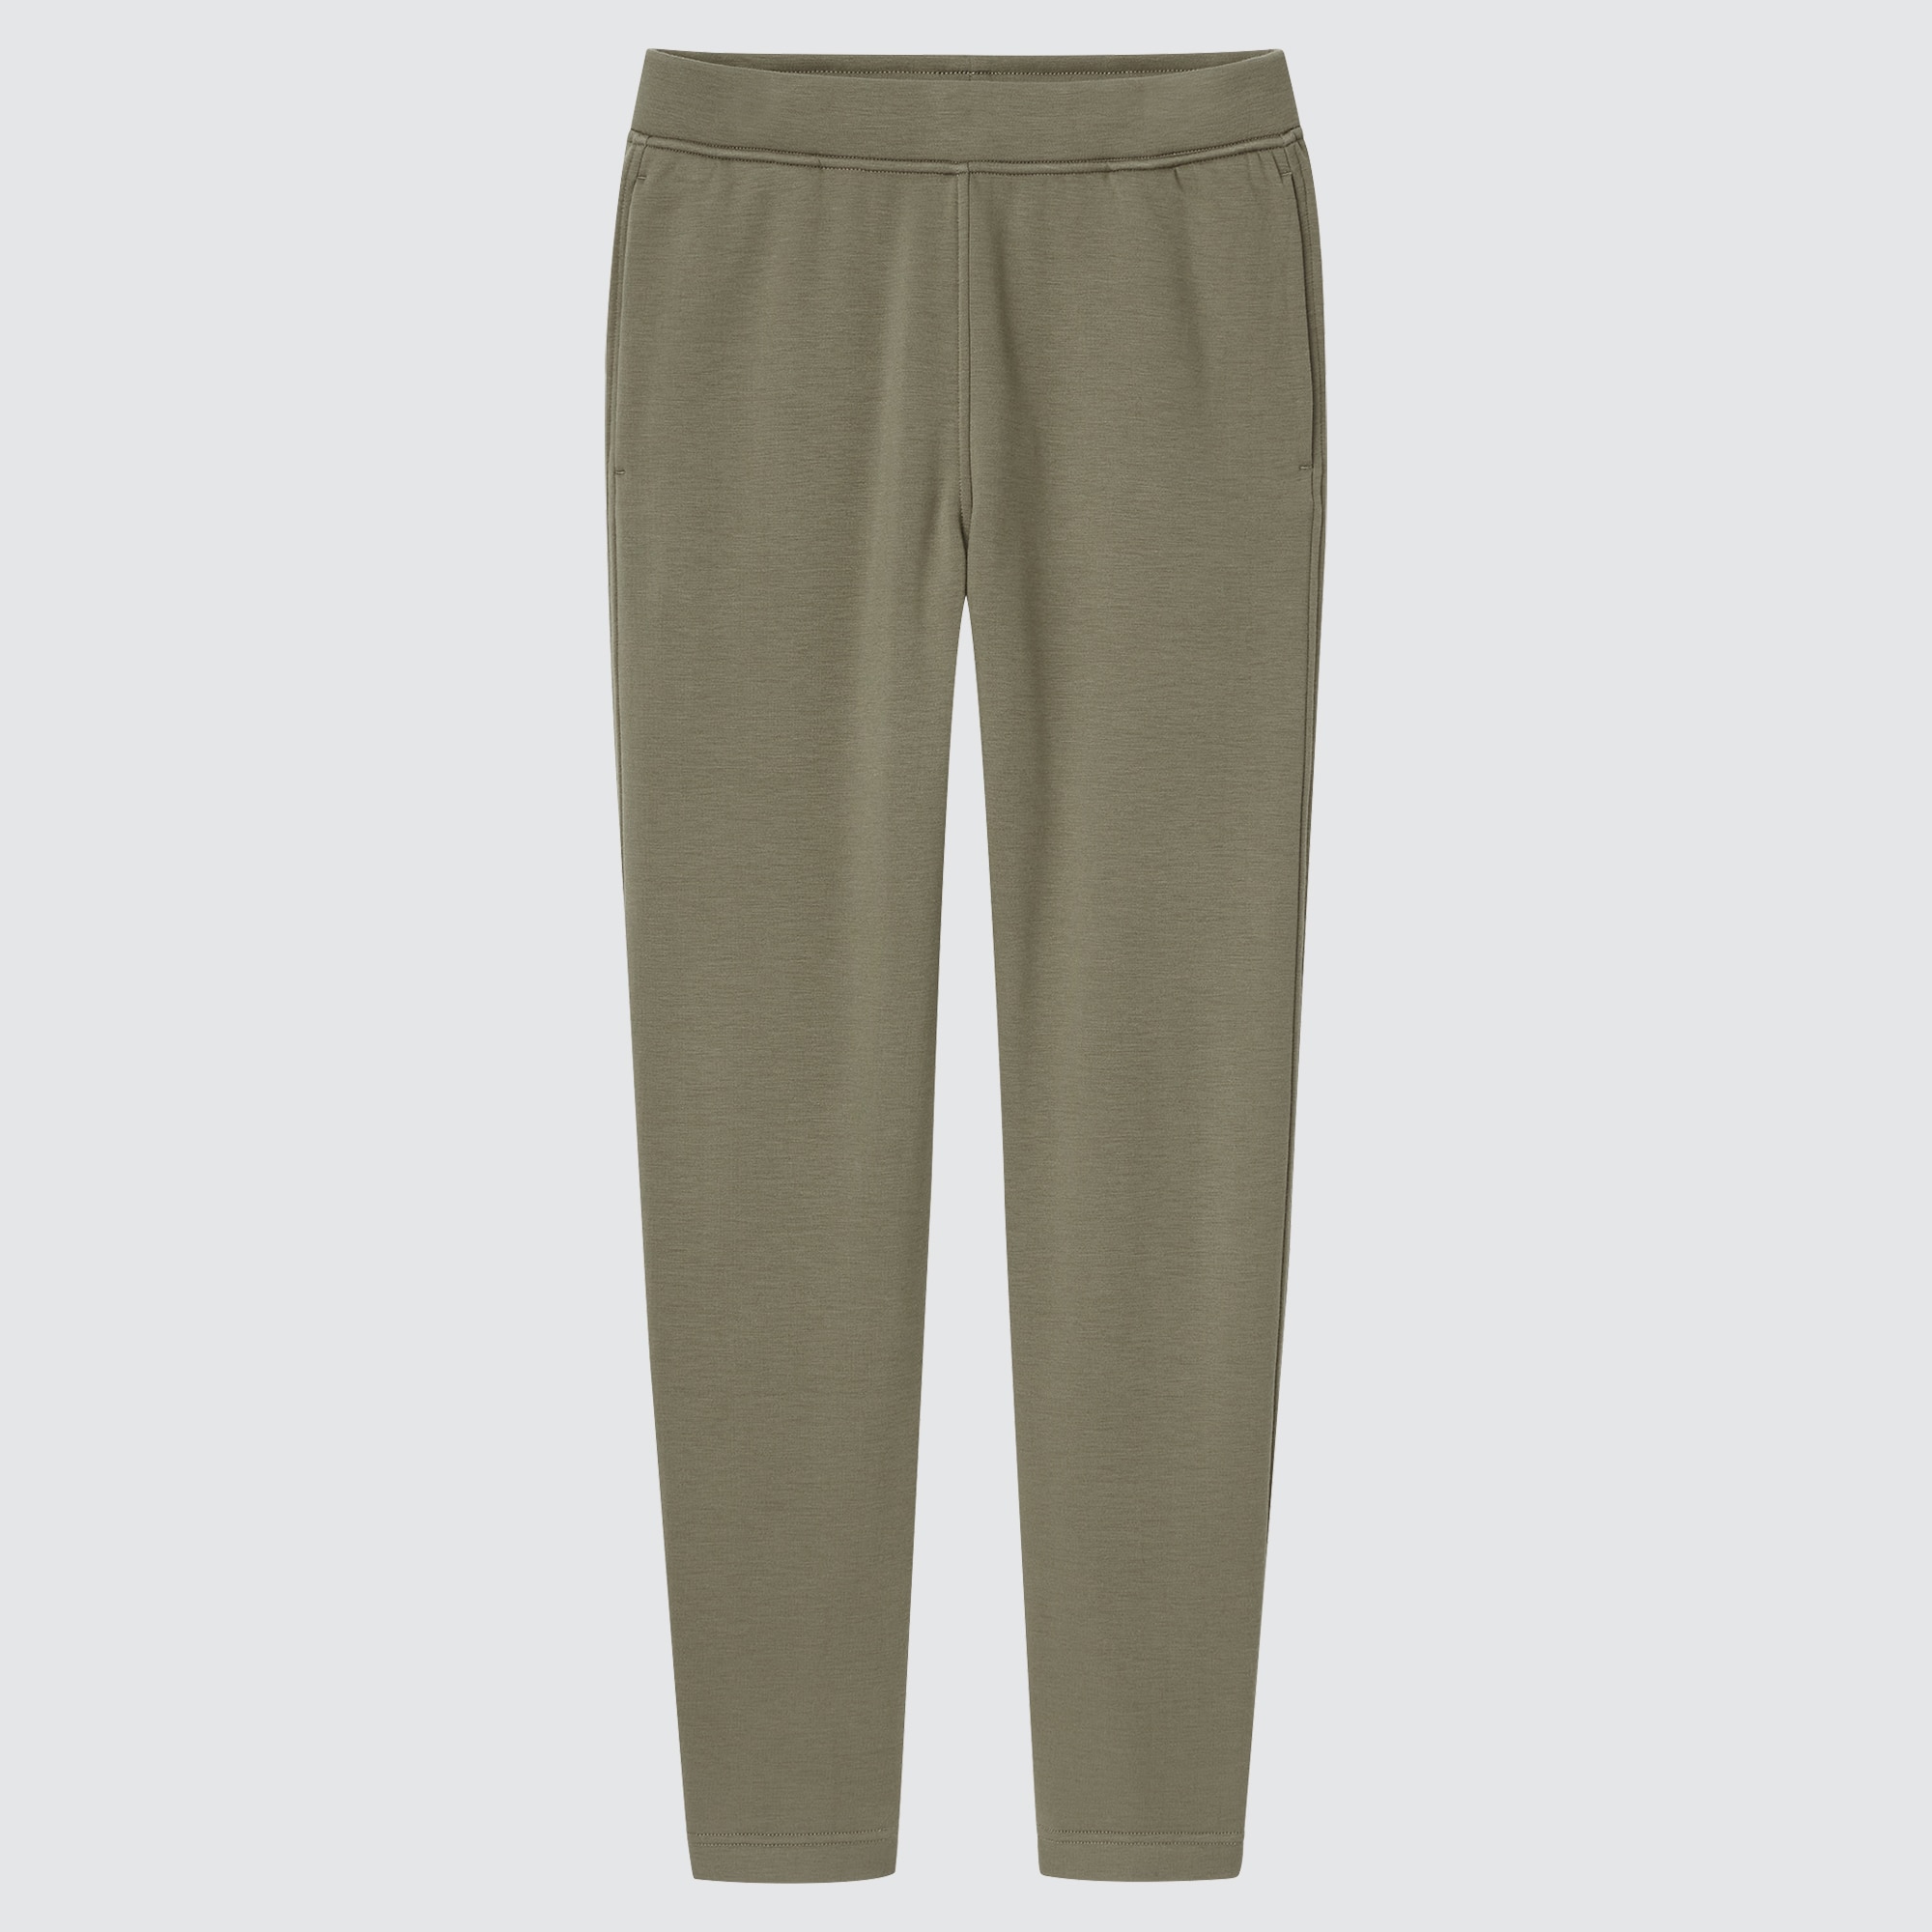 Straight Grey Pants for Women with Elastic Waistband and Zipper